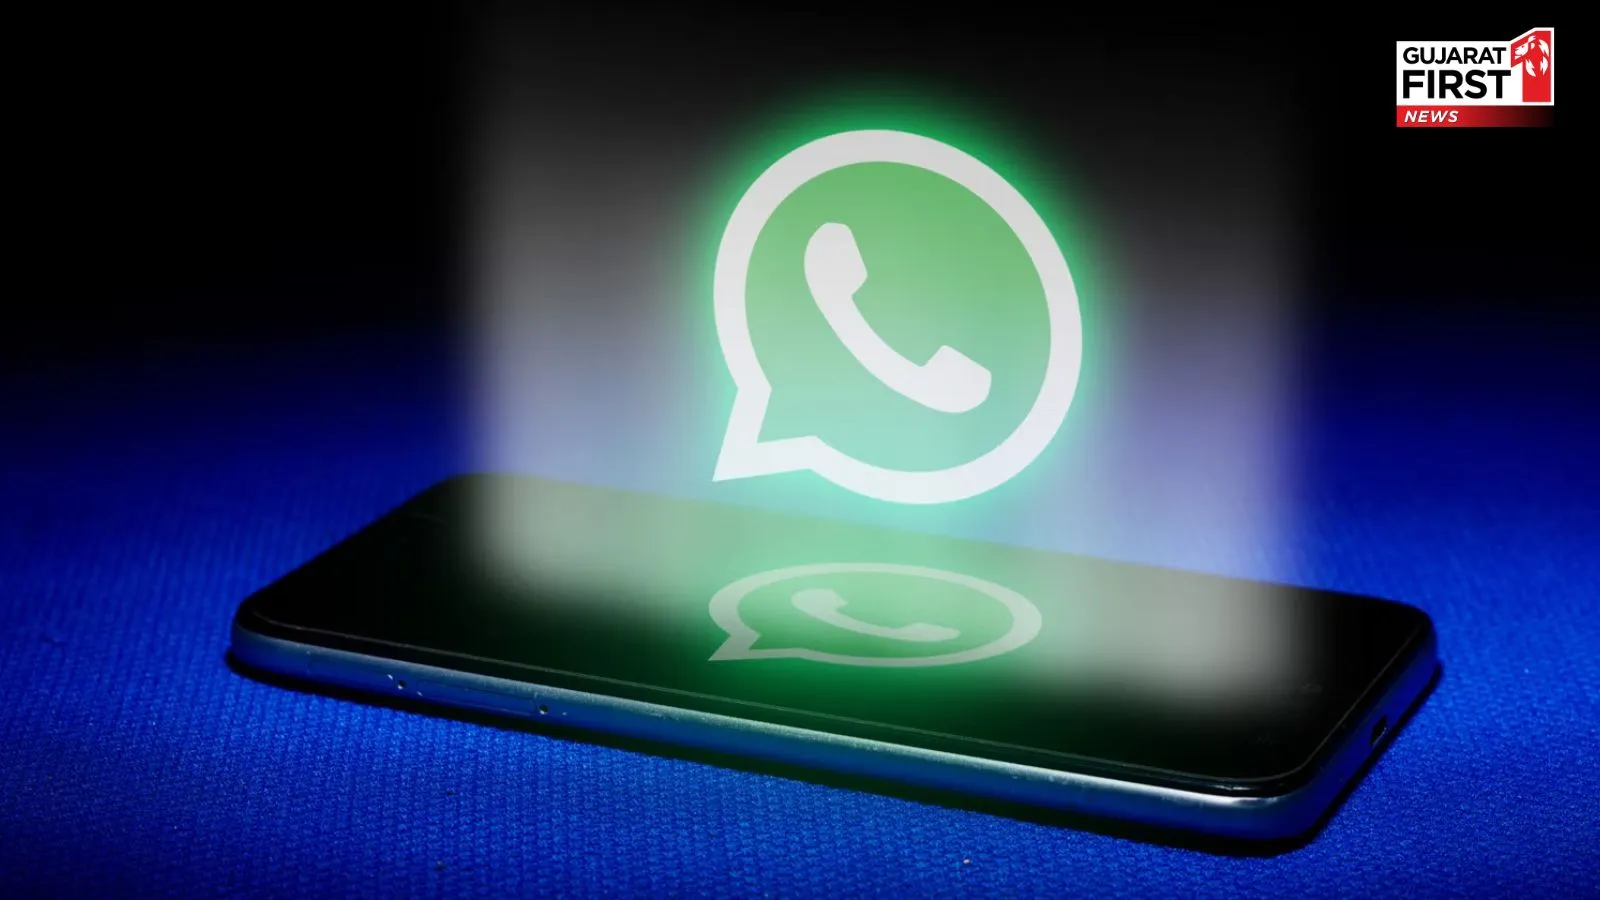 These features of WhatsApp can protect your account from being hacked